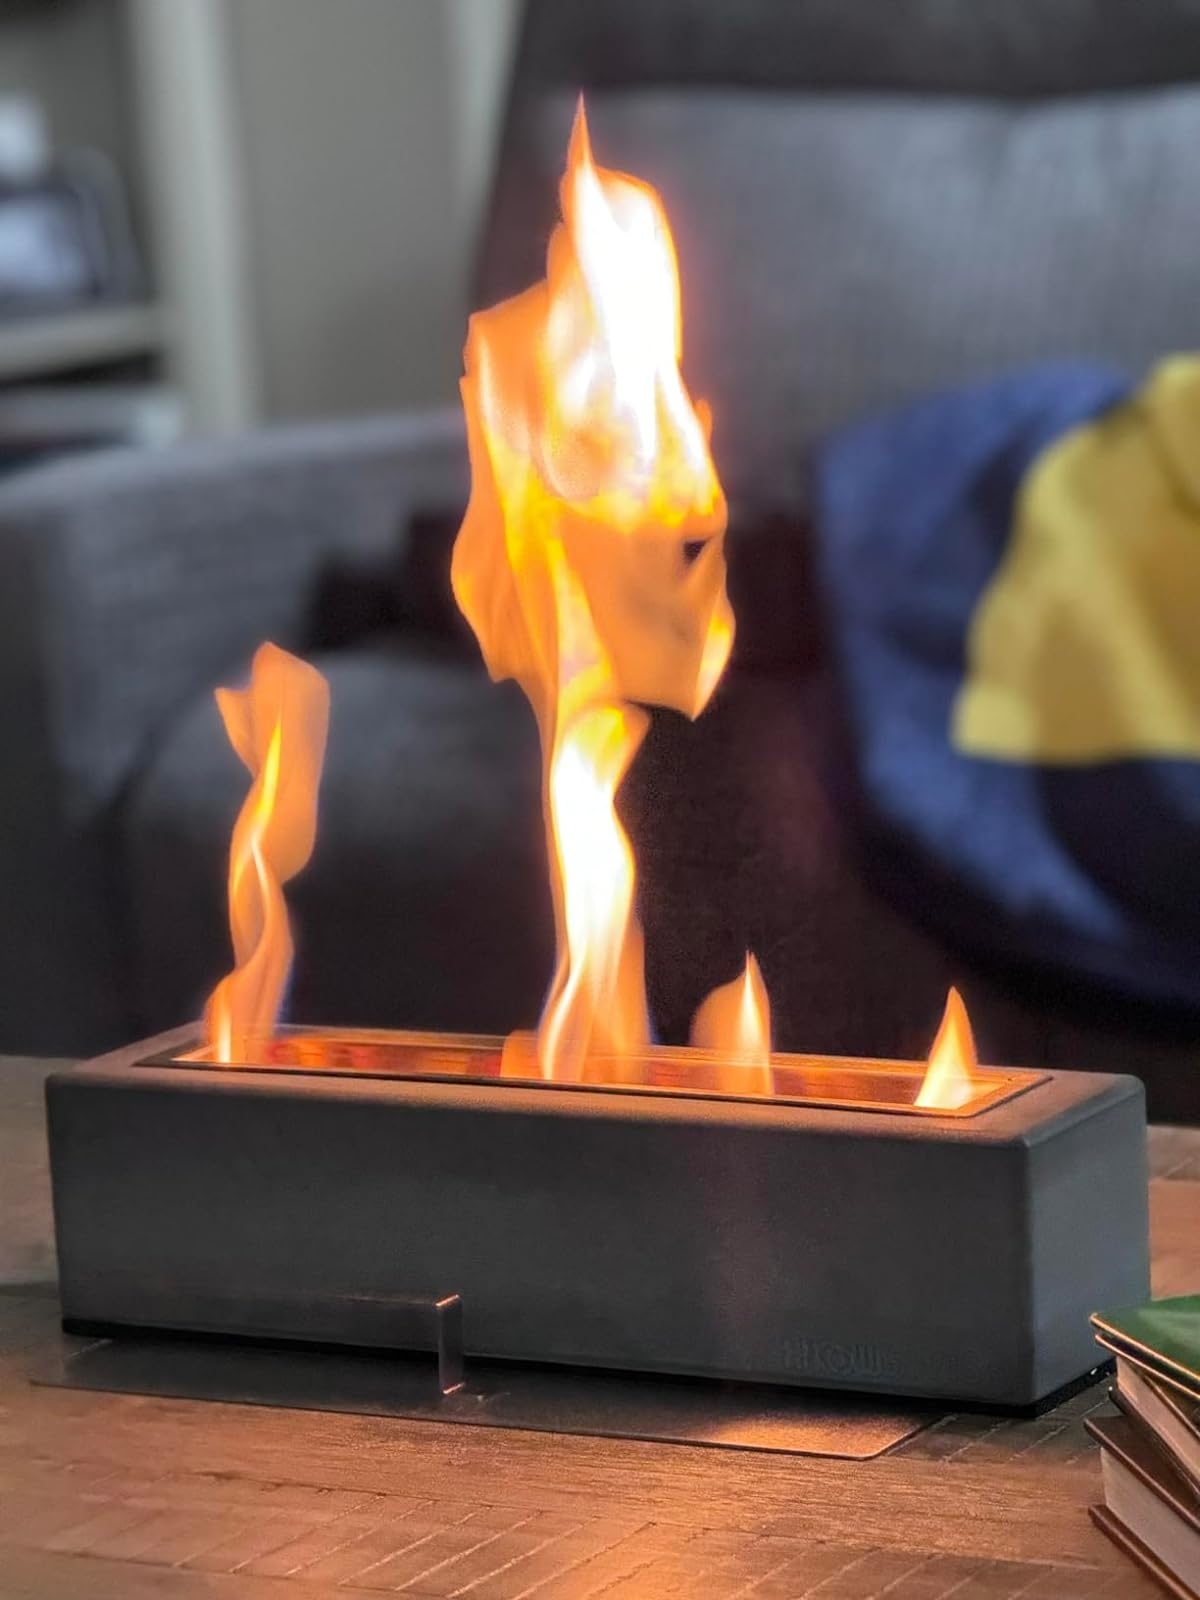 Portable tabletop fireplace with visible flames on a wooden surface, indoors